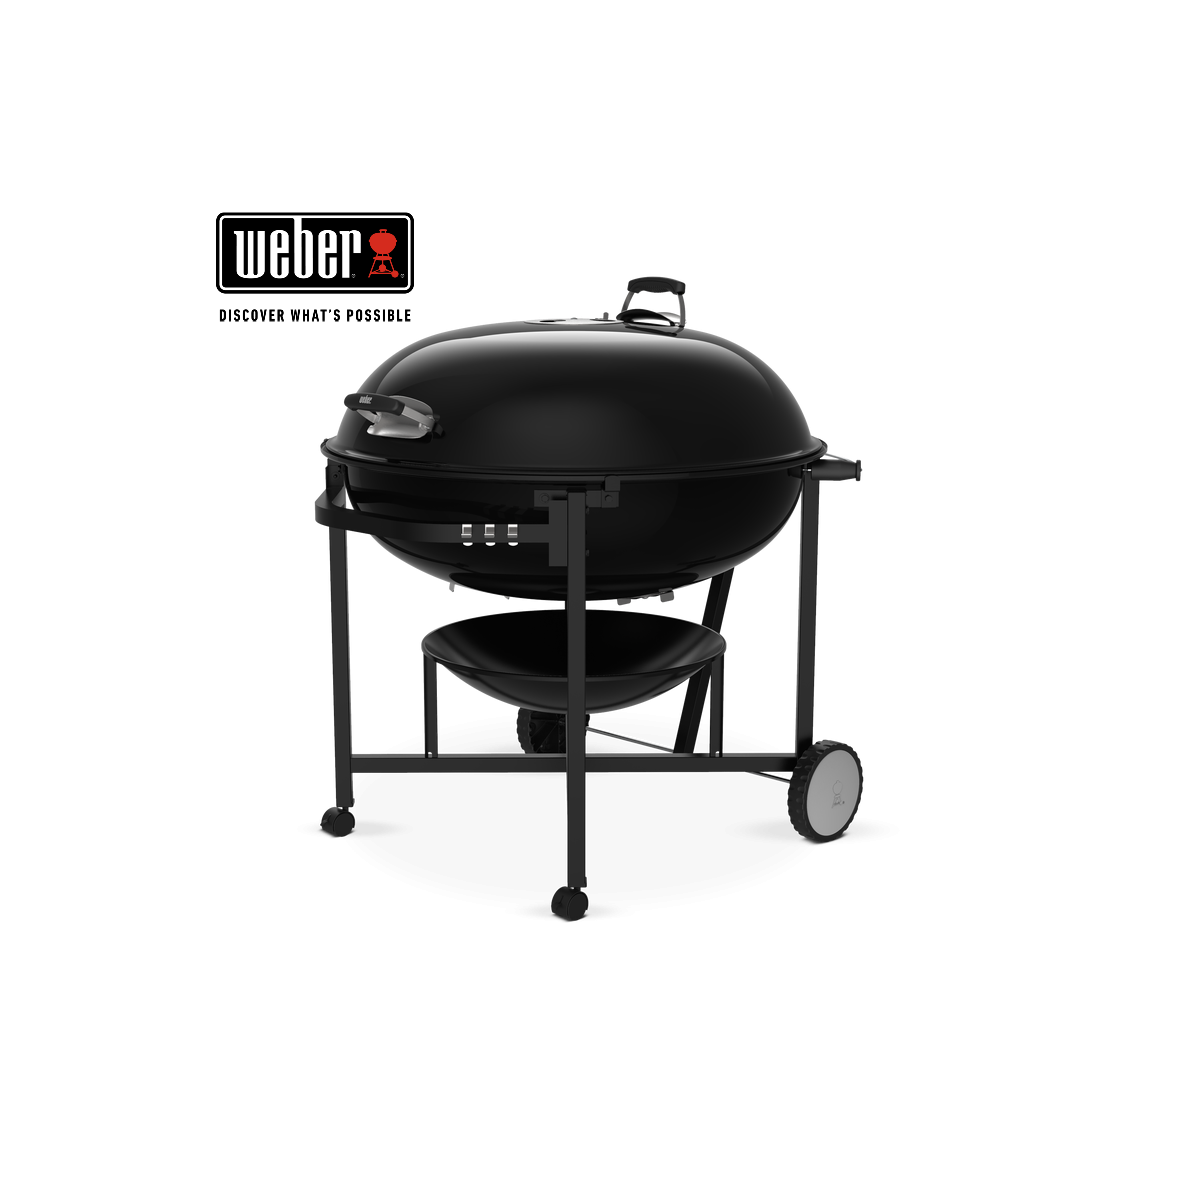 WEBER RANCH KETTLE 94cm charcoal grill, 60004